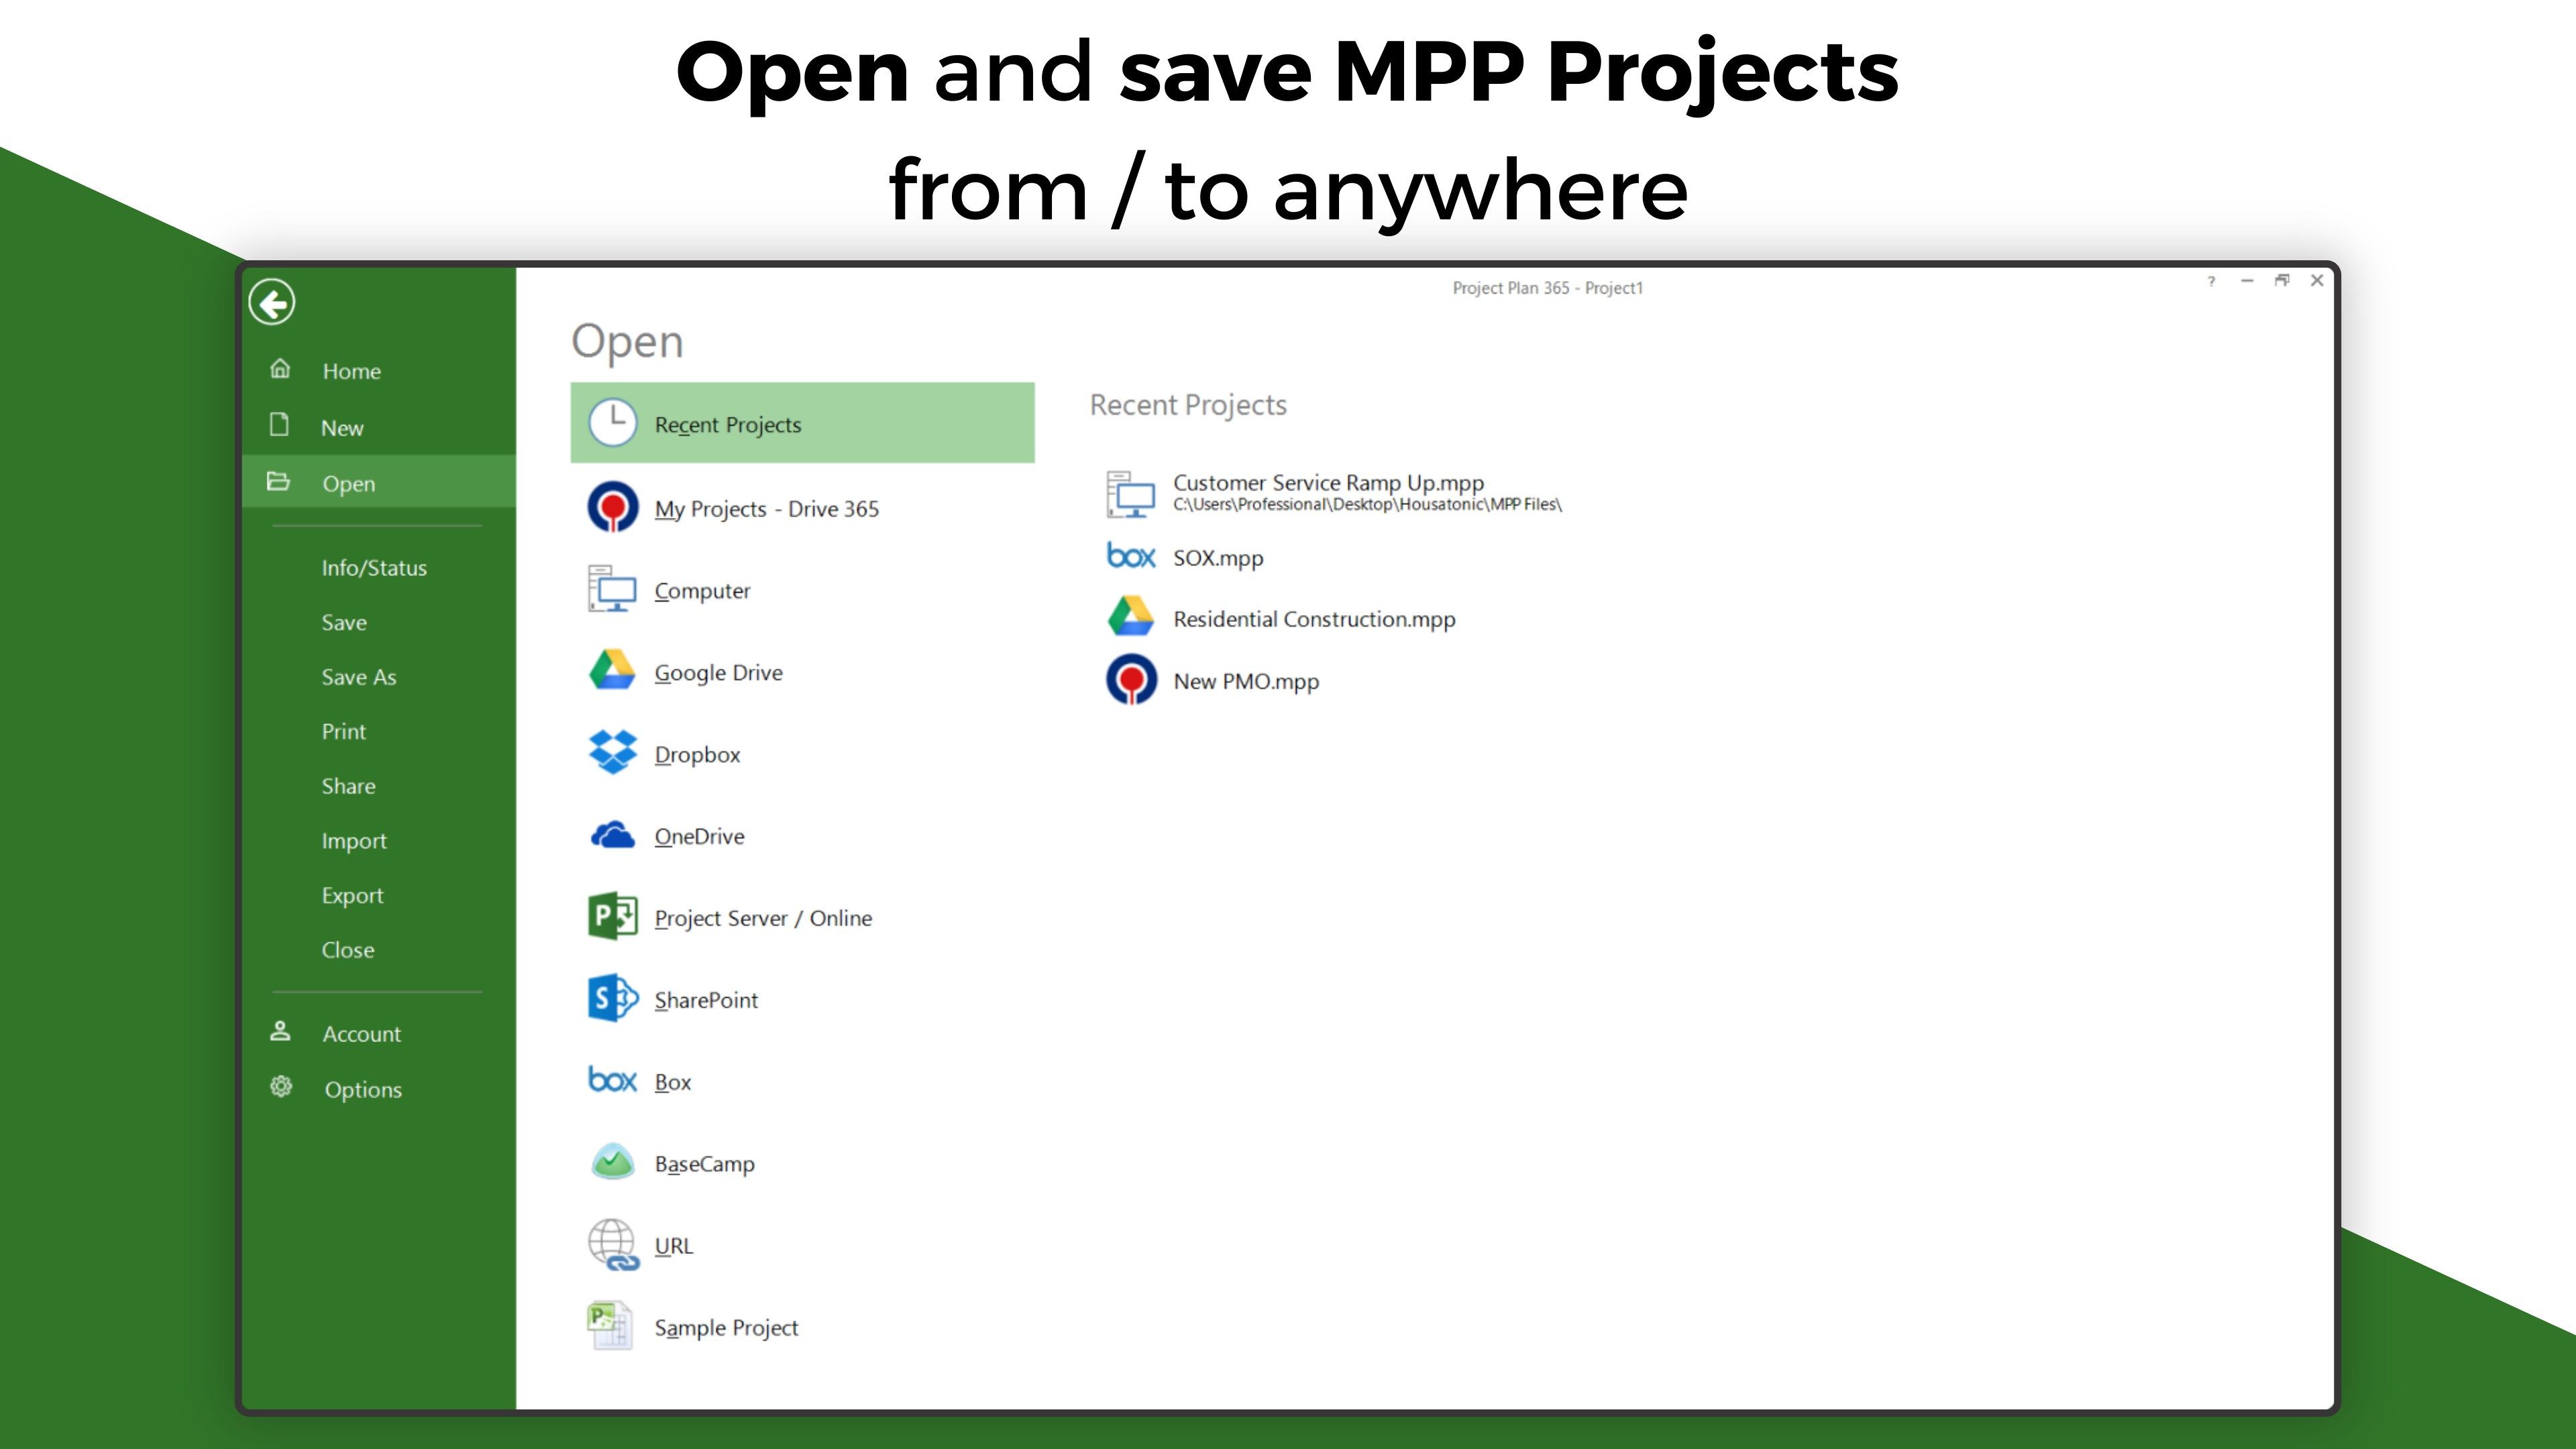 Open and Save MPP projects without import or export